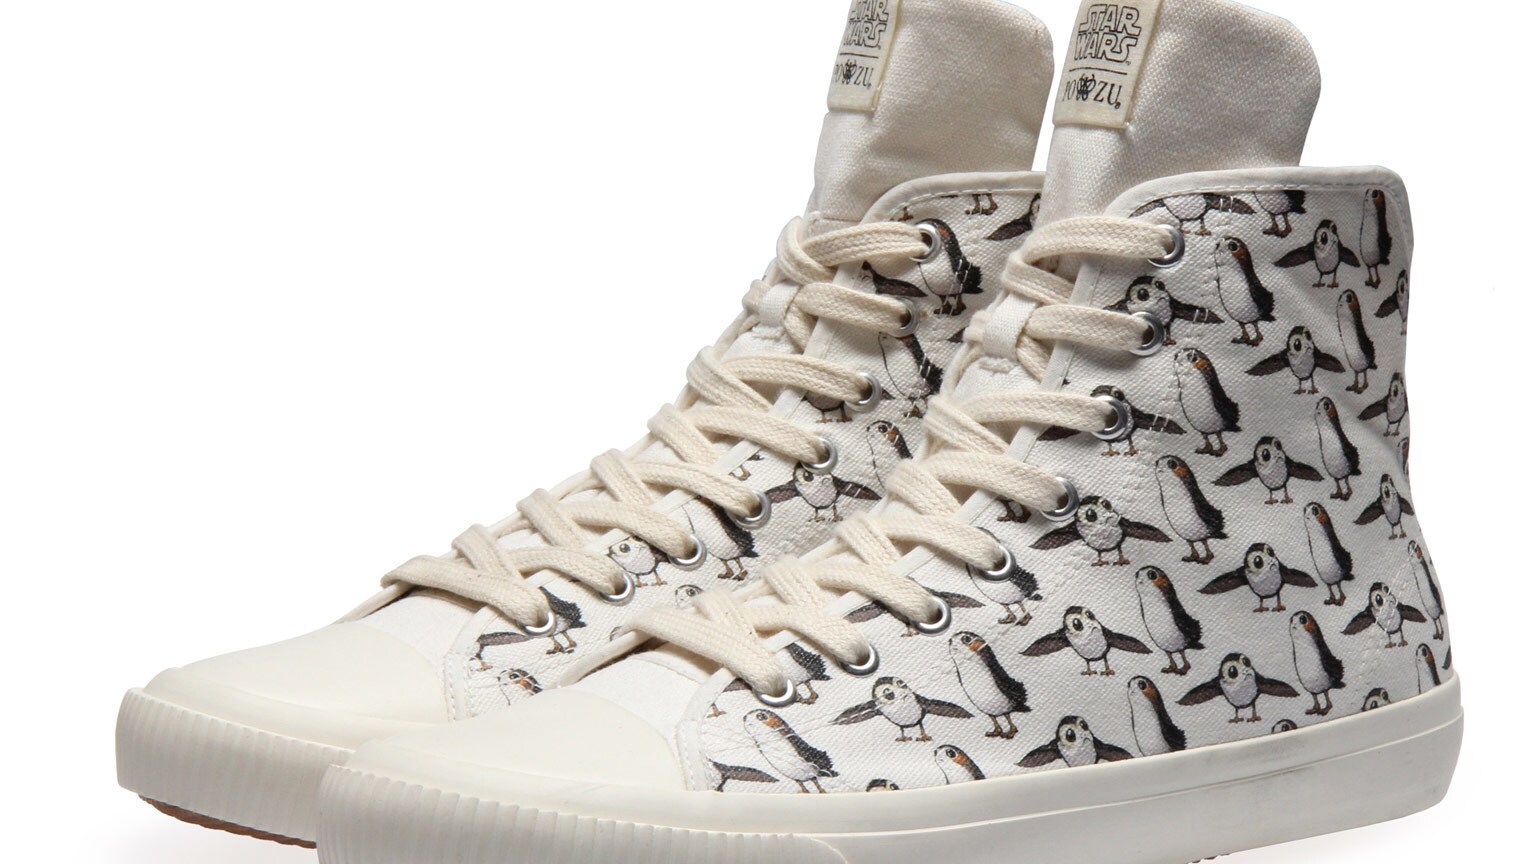 Po-Zu Goes Porg with Stylish New Sneakers - Exclusive